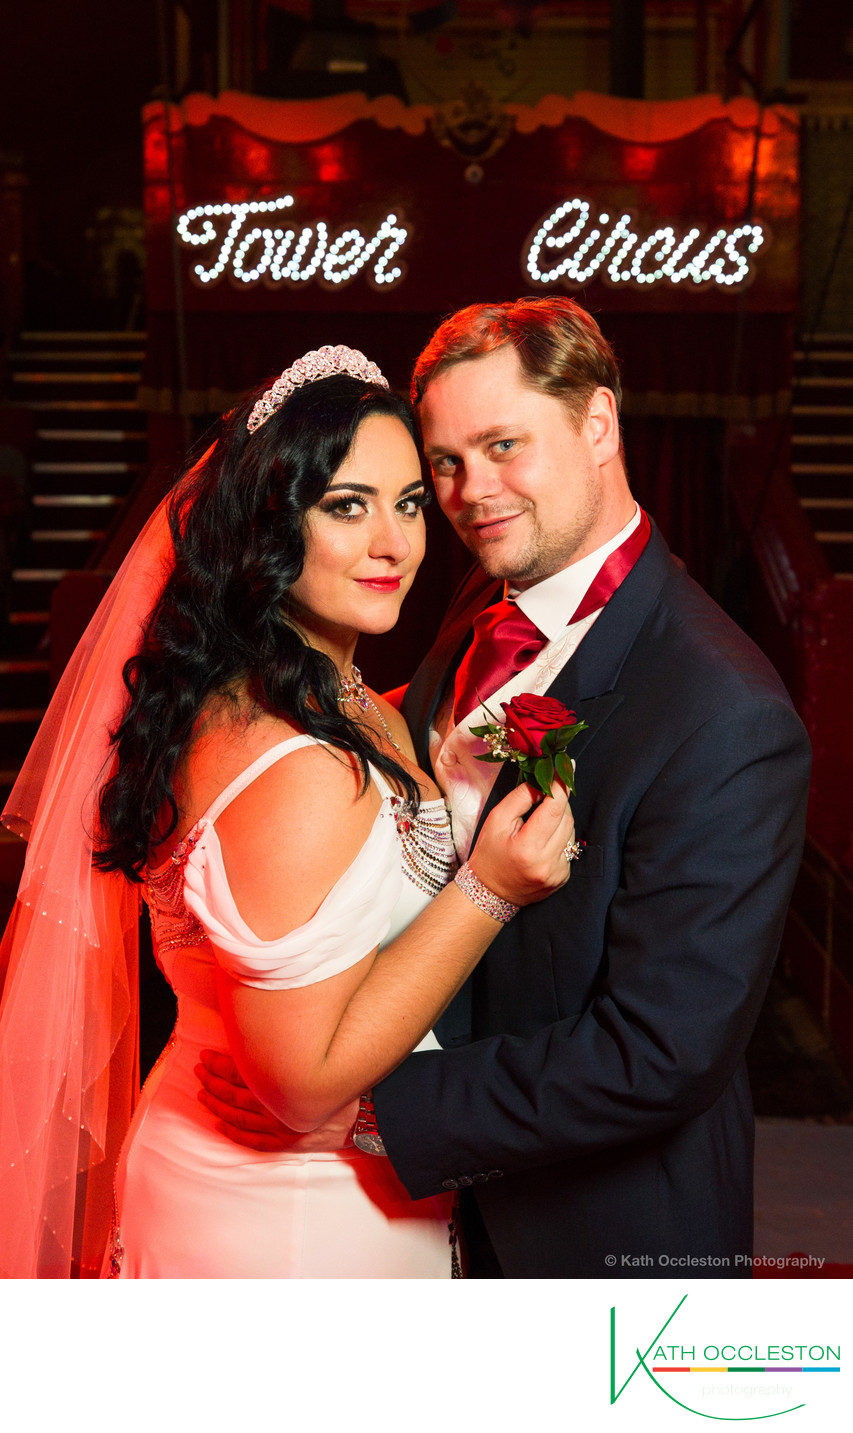 Bride & Groom in the Blackpool Tower Circus